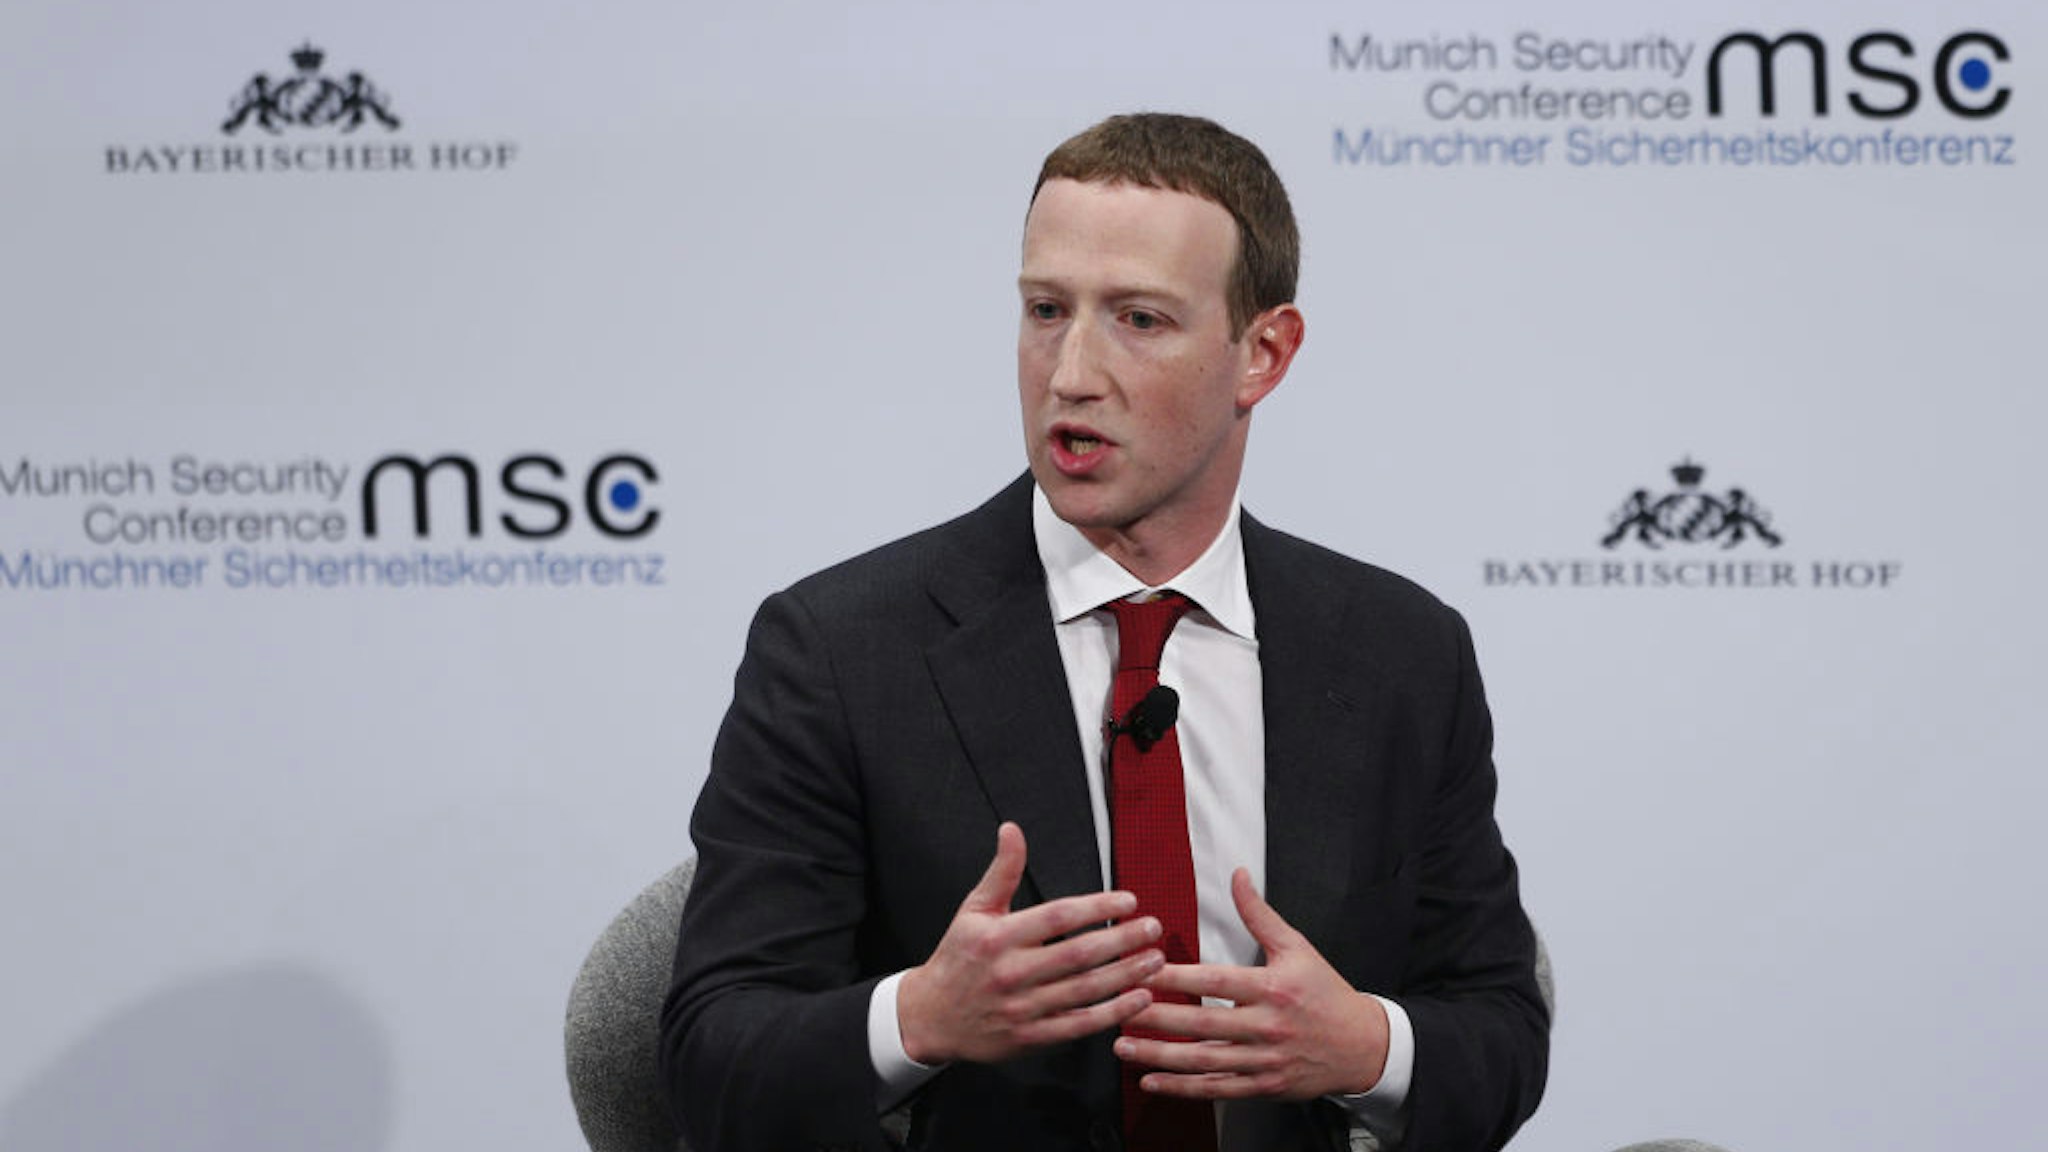 Mark Zuckerberg, chief executive officer and founder of Facebook Inc., gestures as he speaks during the Munich Security Conference at the Bayerischer Hof hotel in Munich, Germany, on Saturday, Feb. 15, 2020. The Libyan conflict is set to be one of the main themes at the annual security conference that runs Feb. 14 - 16. Photographer: Michaela Handrek-Rehle/Bloomberg via Getty Images